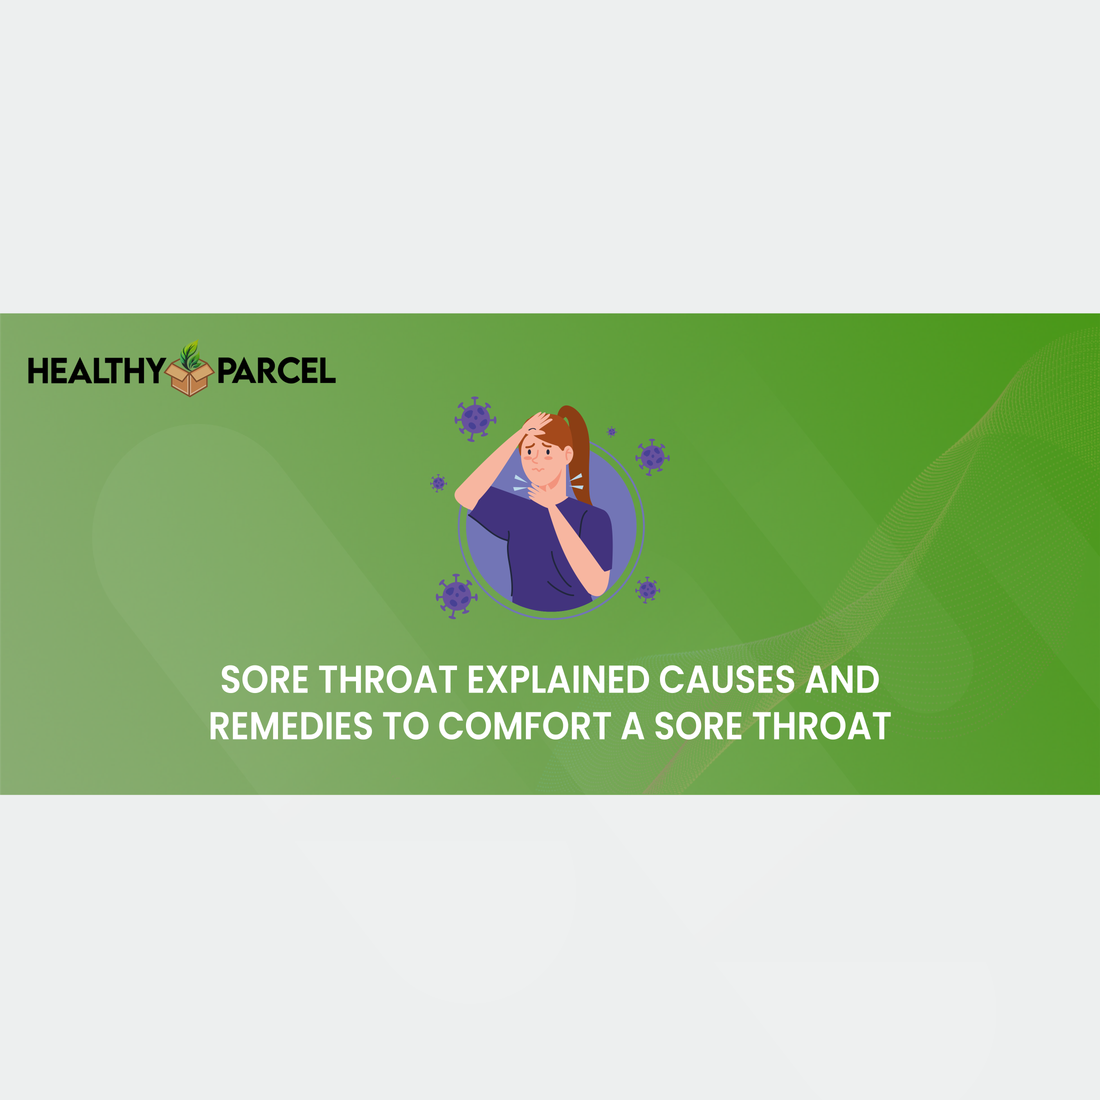 Feature image Sore Throat Explained Causes and Remedies to Comfort a Sore Throat